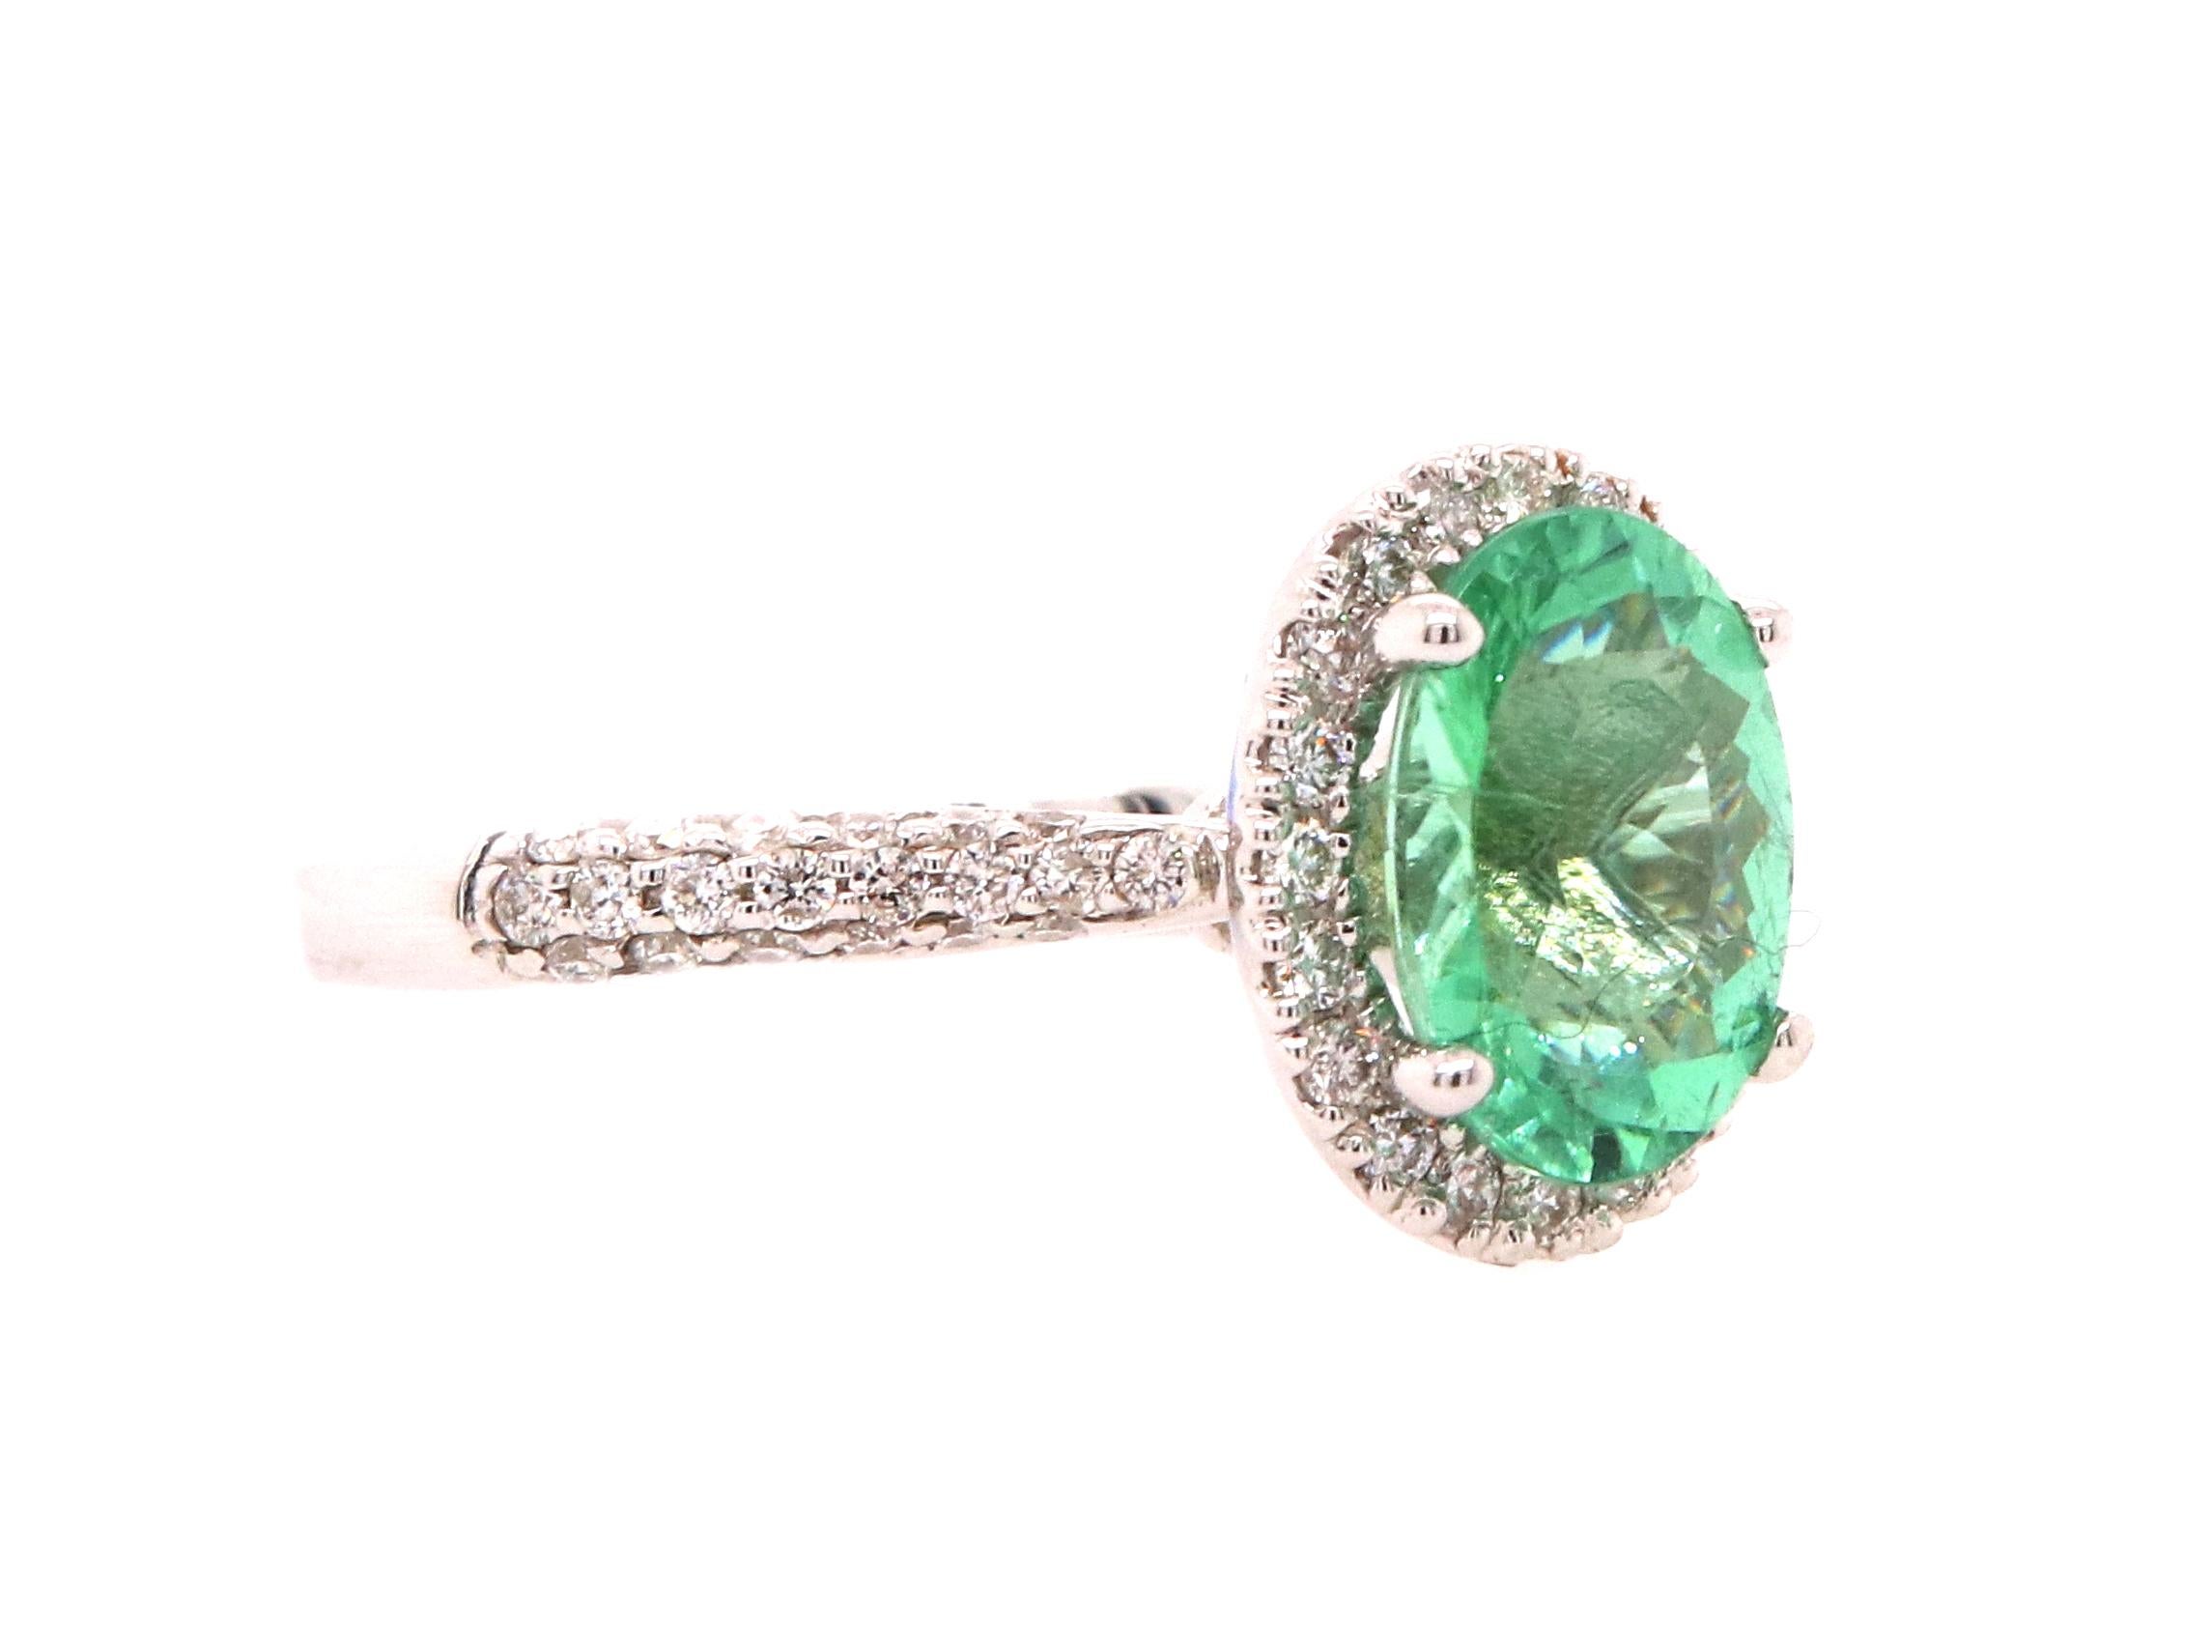 Material: 18k White Gold 
Center Stone Details: 2.14 Carat Oval Shaped Paraiba Tourmaline 
Diamond Details: 60 Round White Diamonds at Approximately 0.31 Carats - Clarity: SI / Color: H-I
Complimentary sizing on all Alberto rings

Fine one-of-a-kind